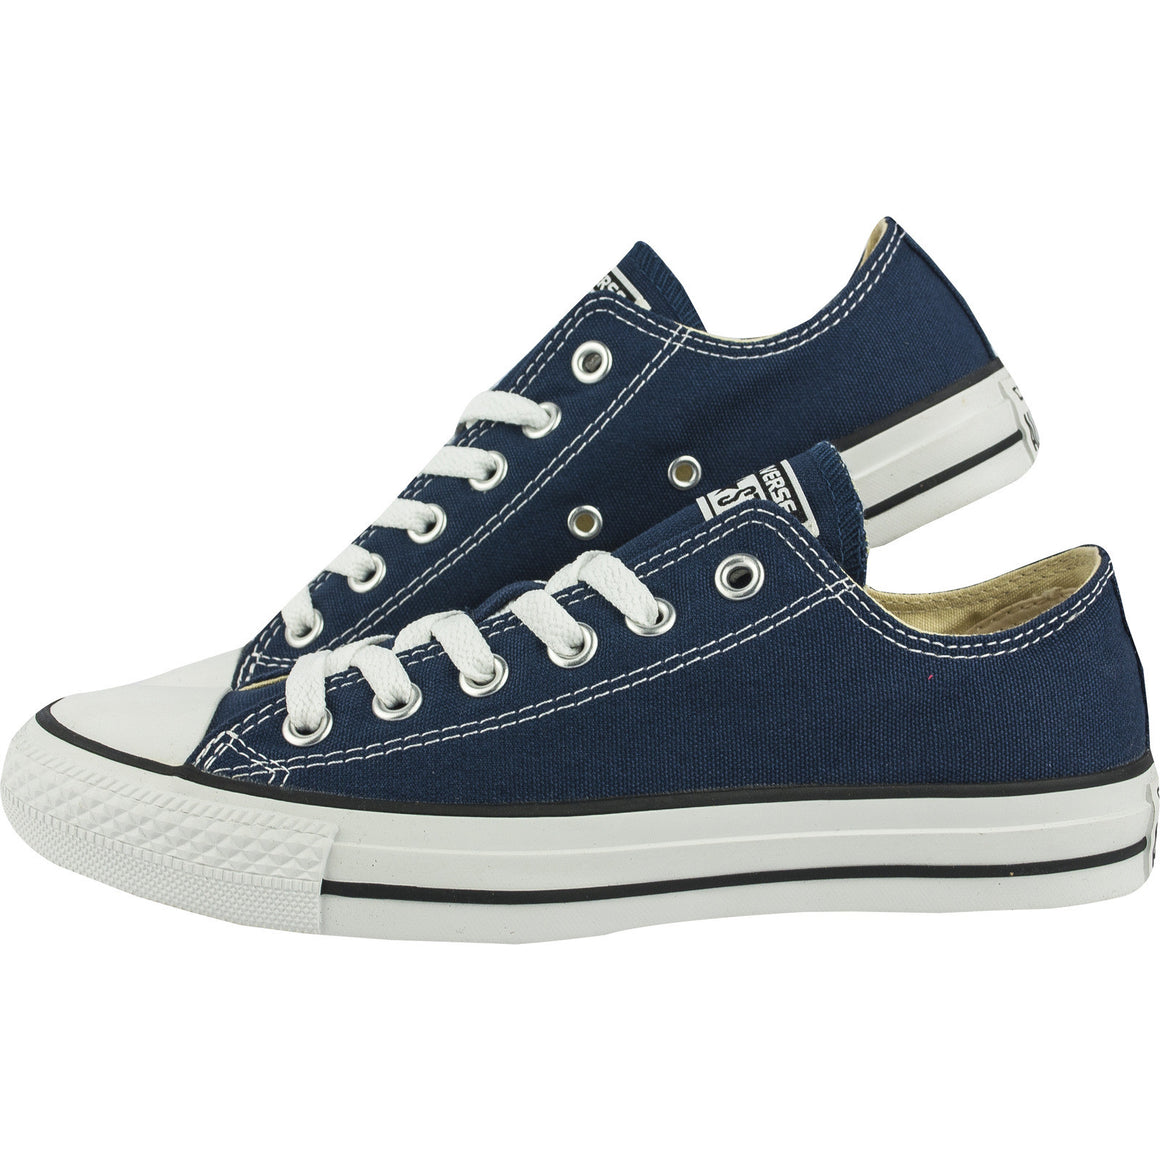 Converse Classic Chuck Taylor Low 